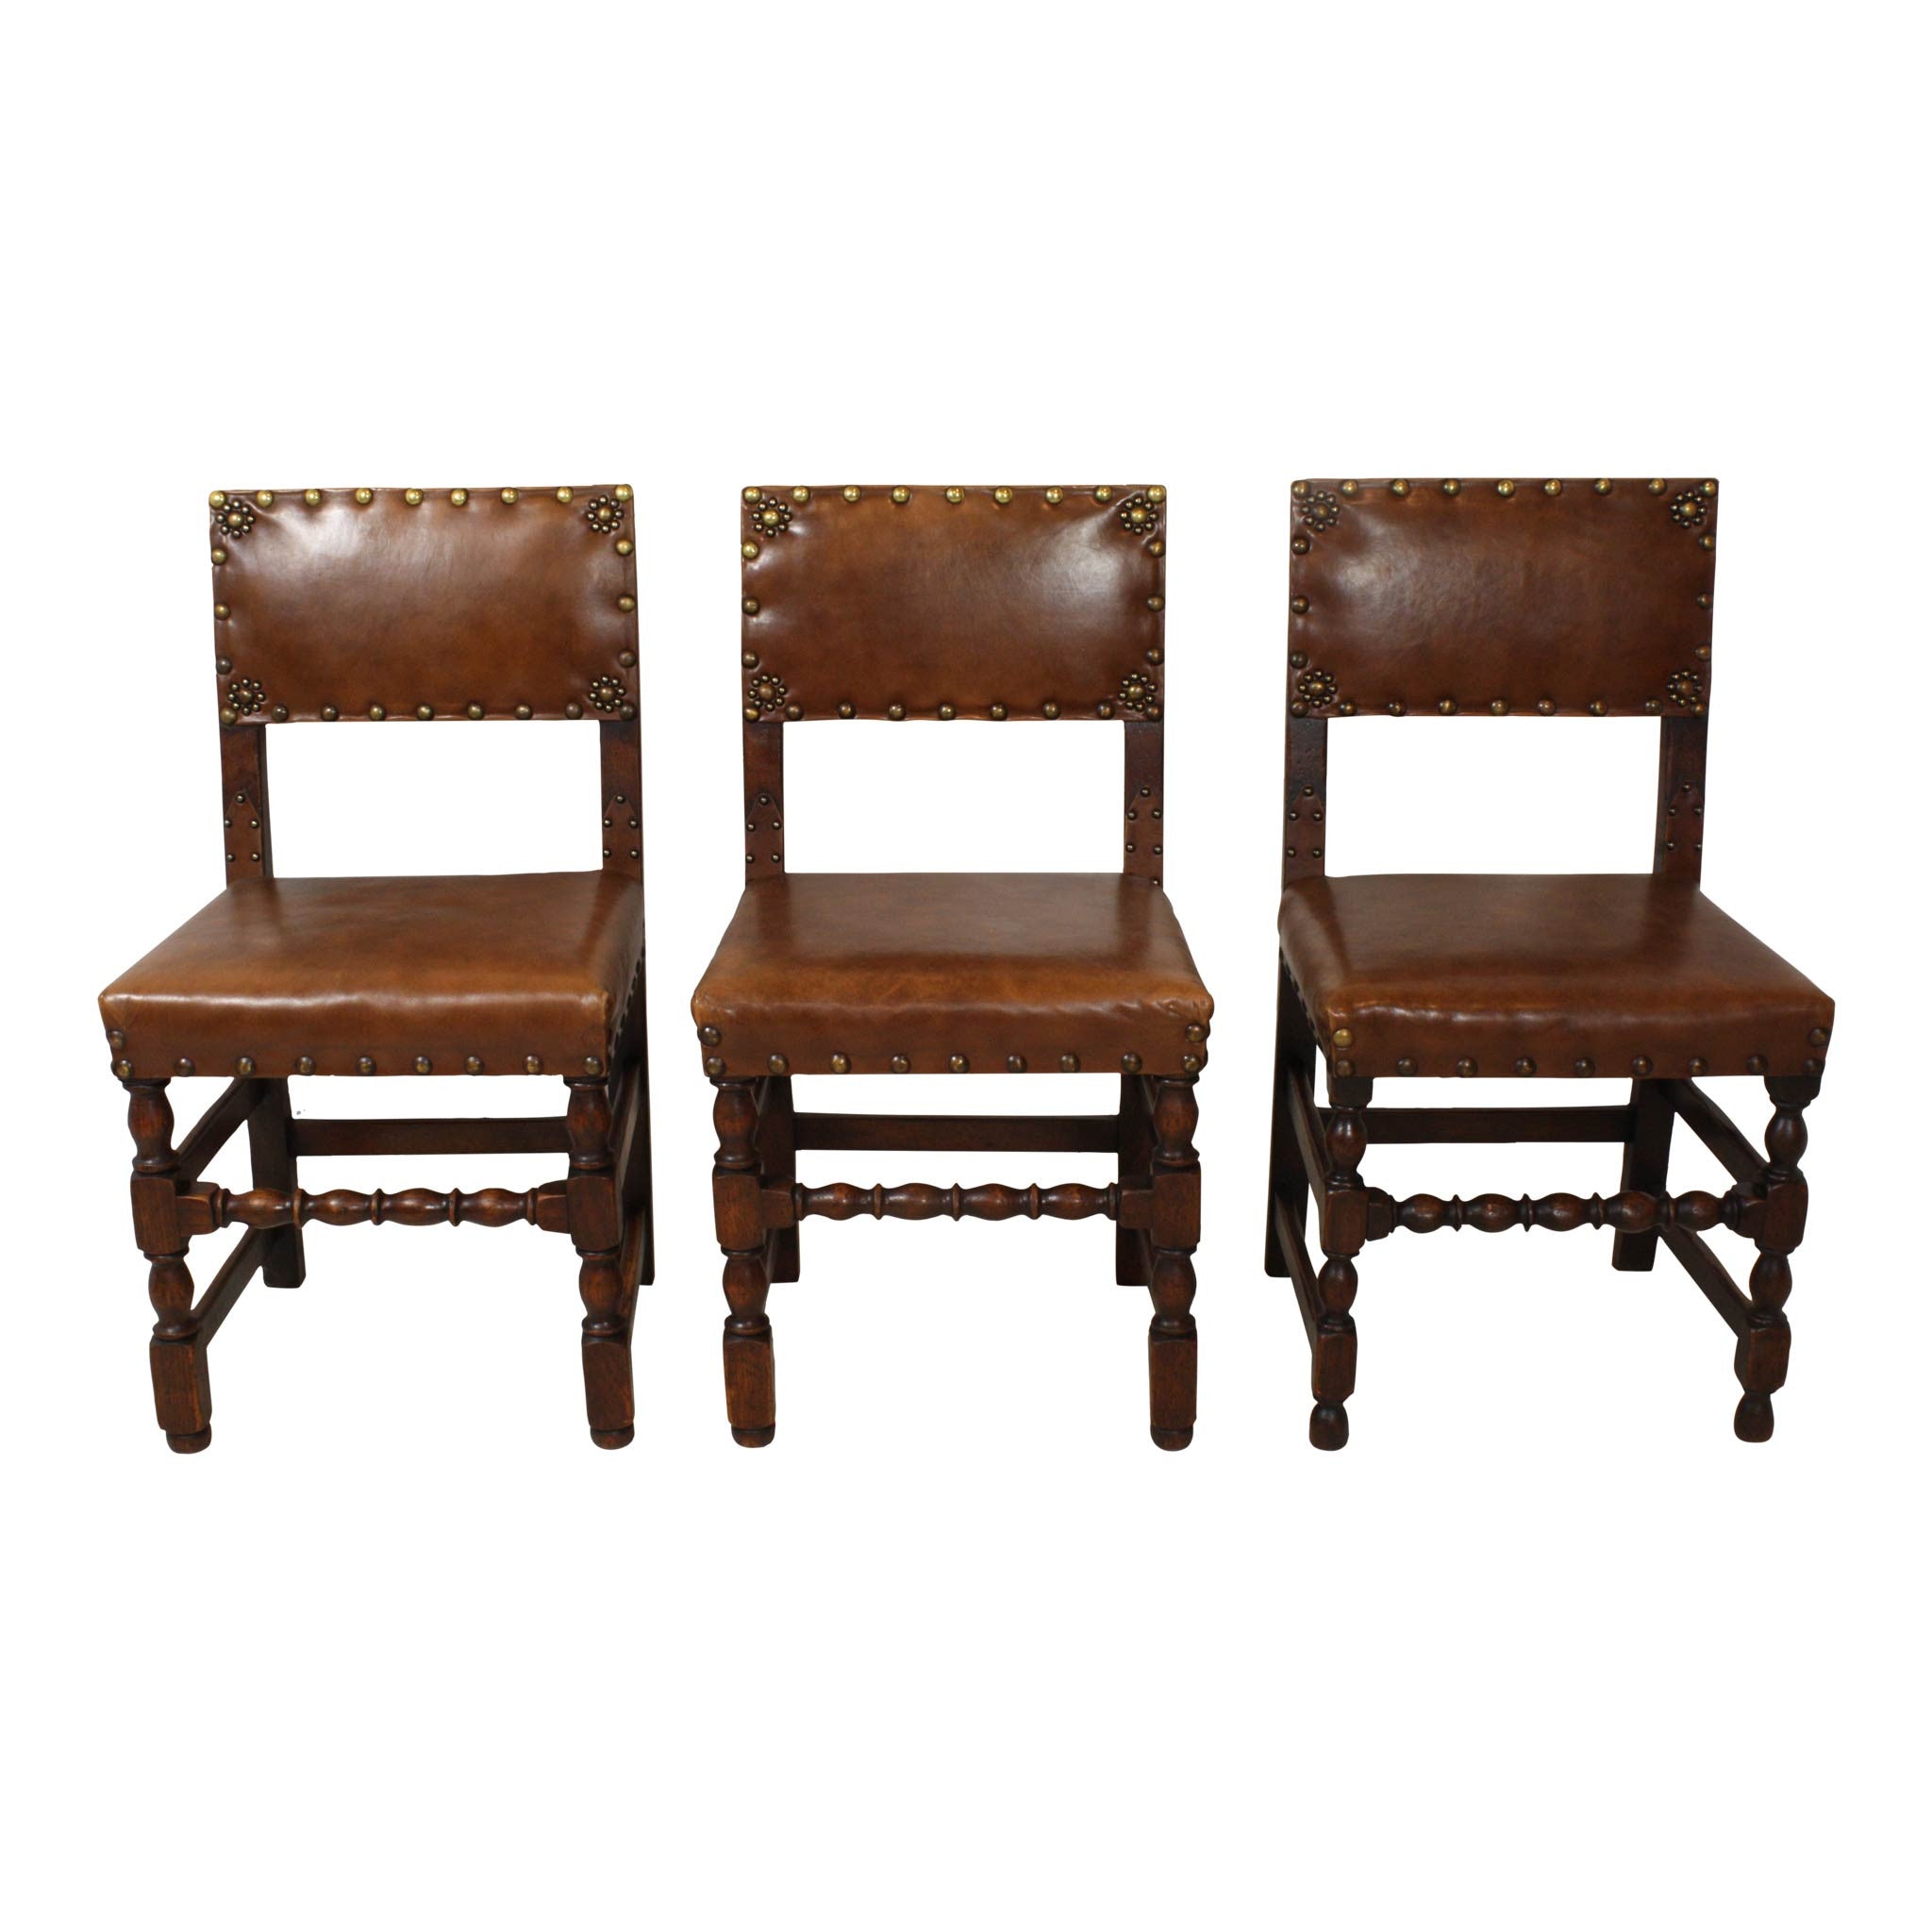 Oak and Leather Chairs set of 6